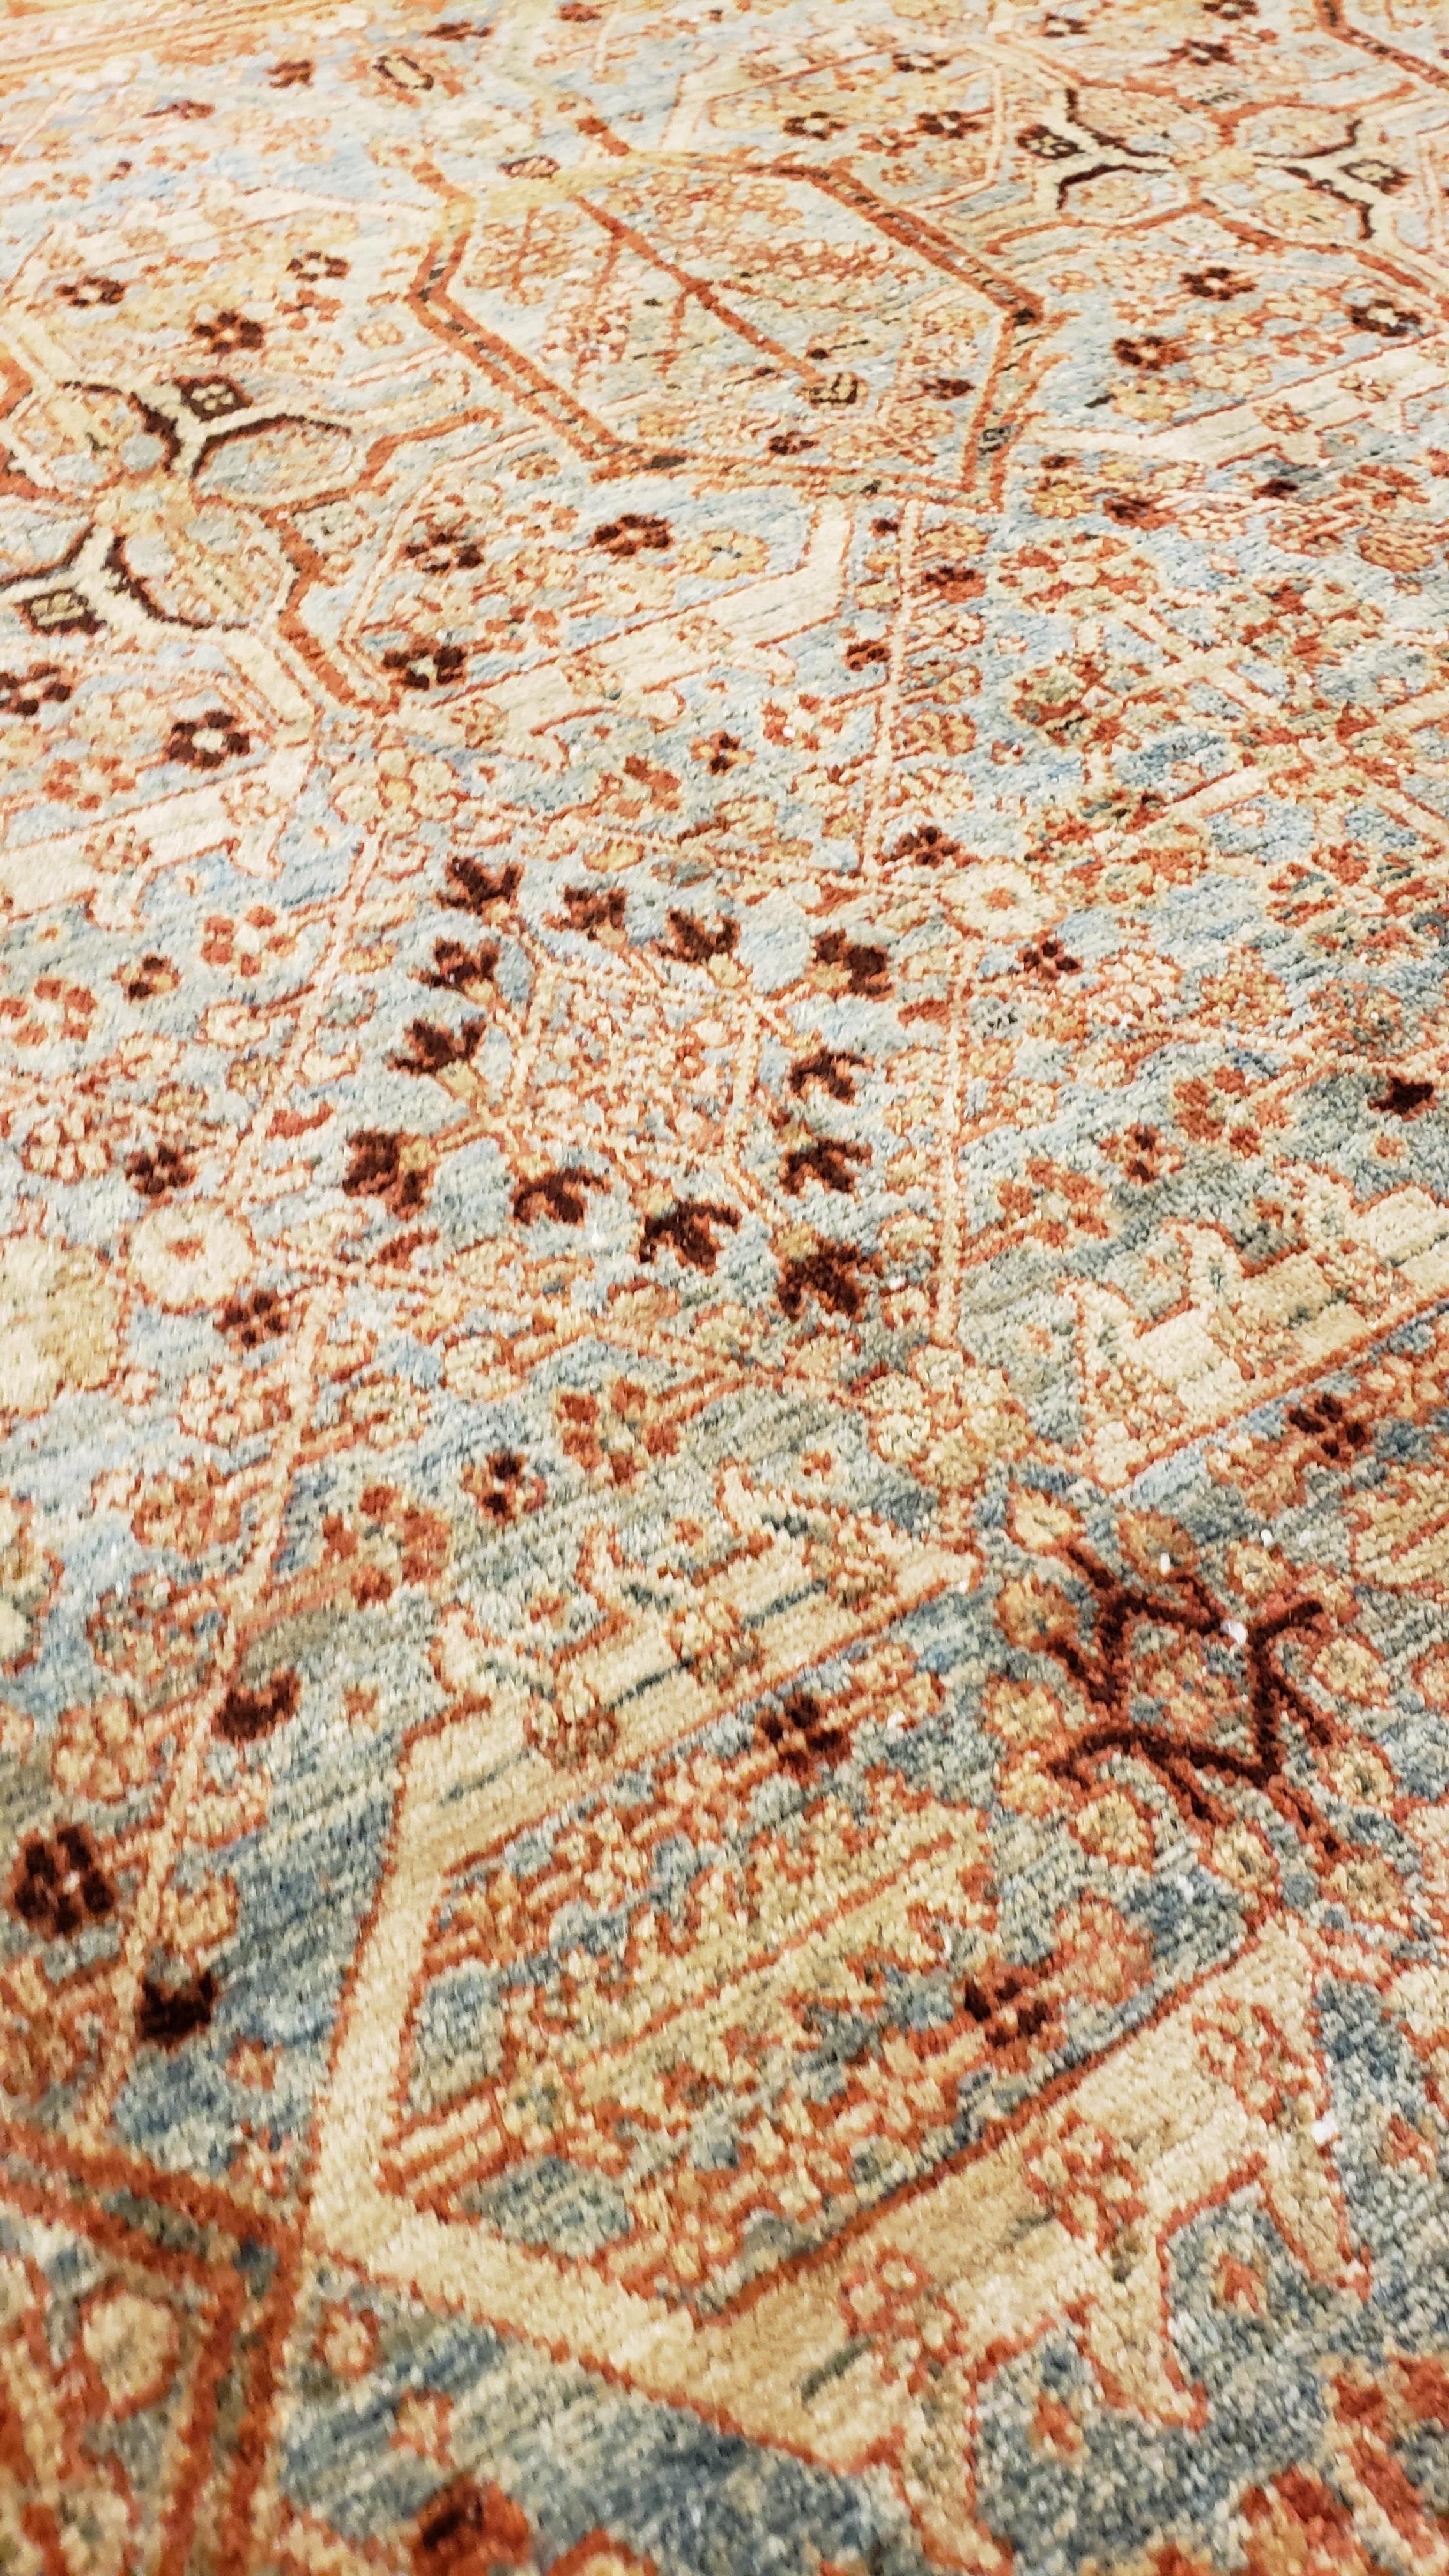 Early 20th Century Antique Tabriz Rug, Handmade Oriental Rug in Terracotta, Light Blue and Taupe